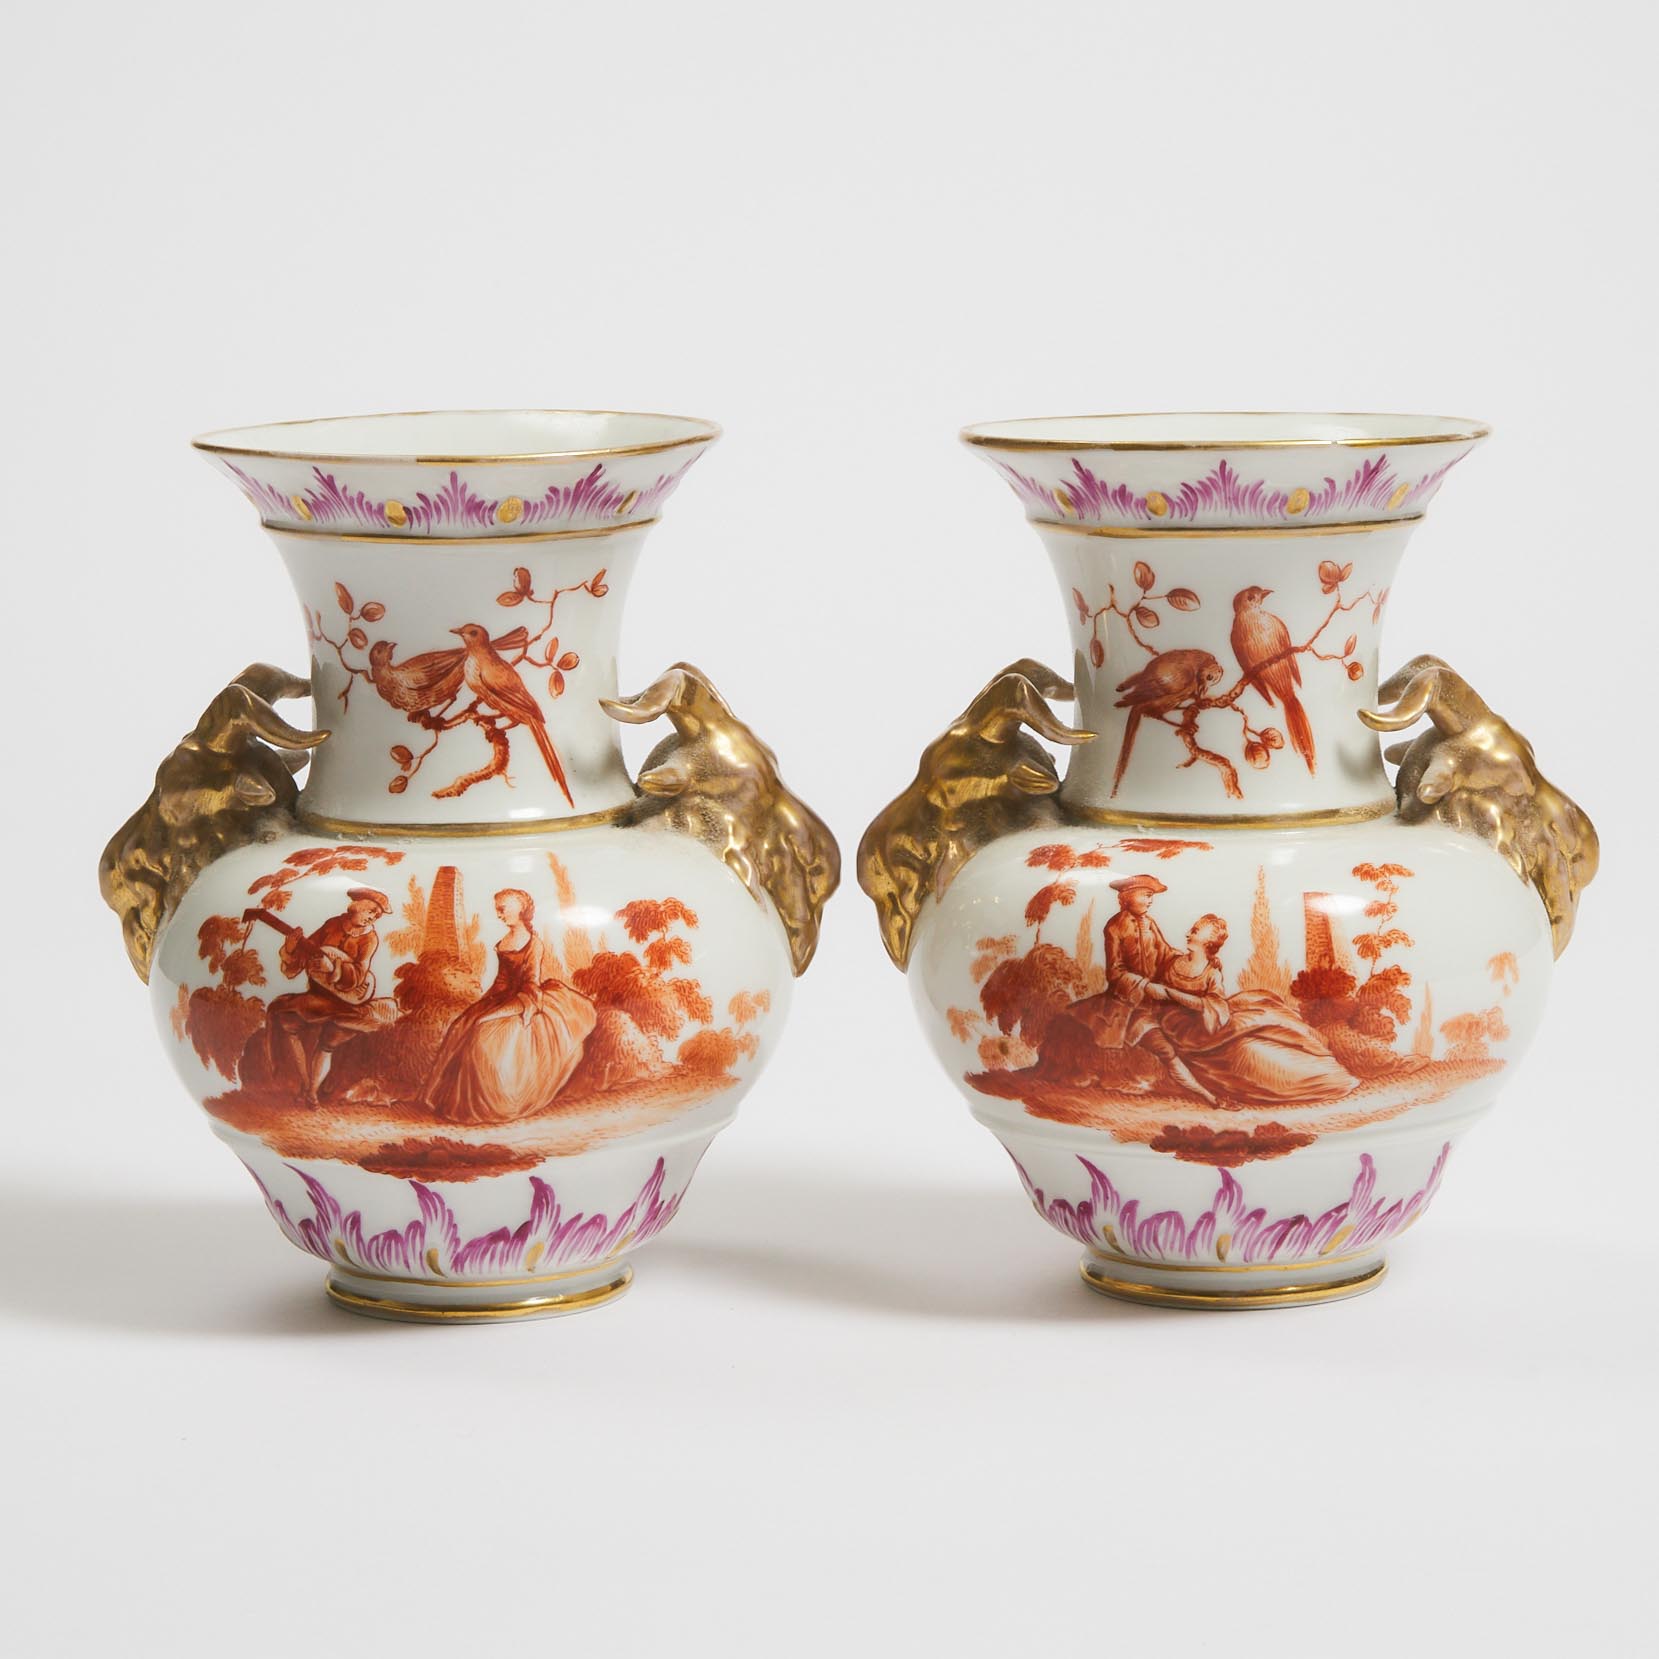 Pair of Berlin Two-Handled Vases, late 19th/early 20th century